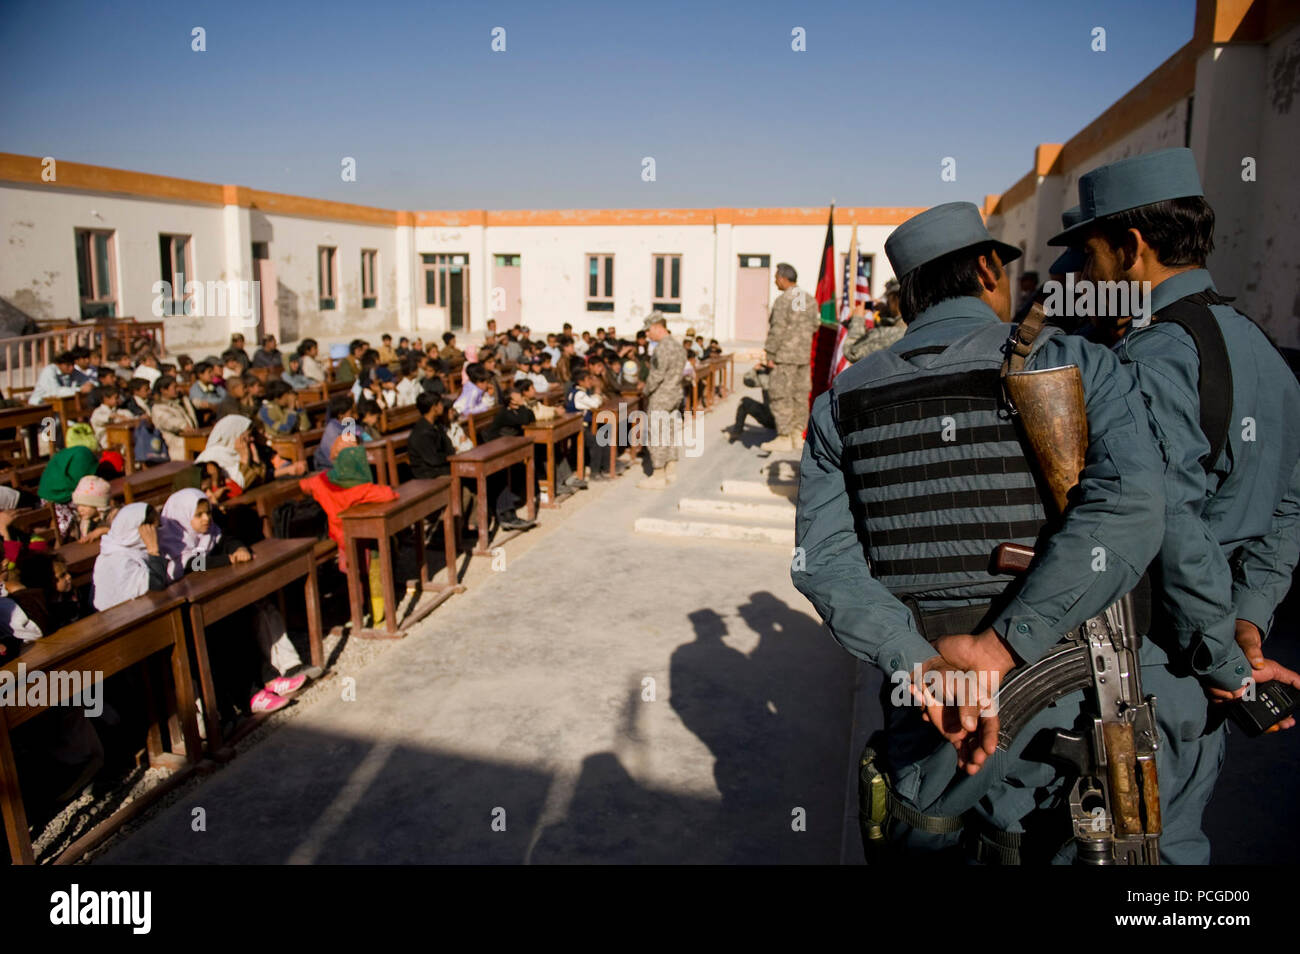 Afghan national policemen look on as a local coalition leader speaks to children at an elementary school near Kandahar Air Field. Both Afghan and coalition leaders spoke to the children on the importance of education and good behavior before handing out school supplies. Stock Photo